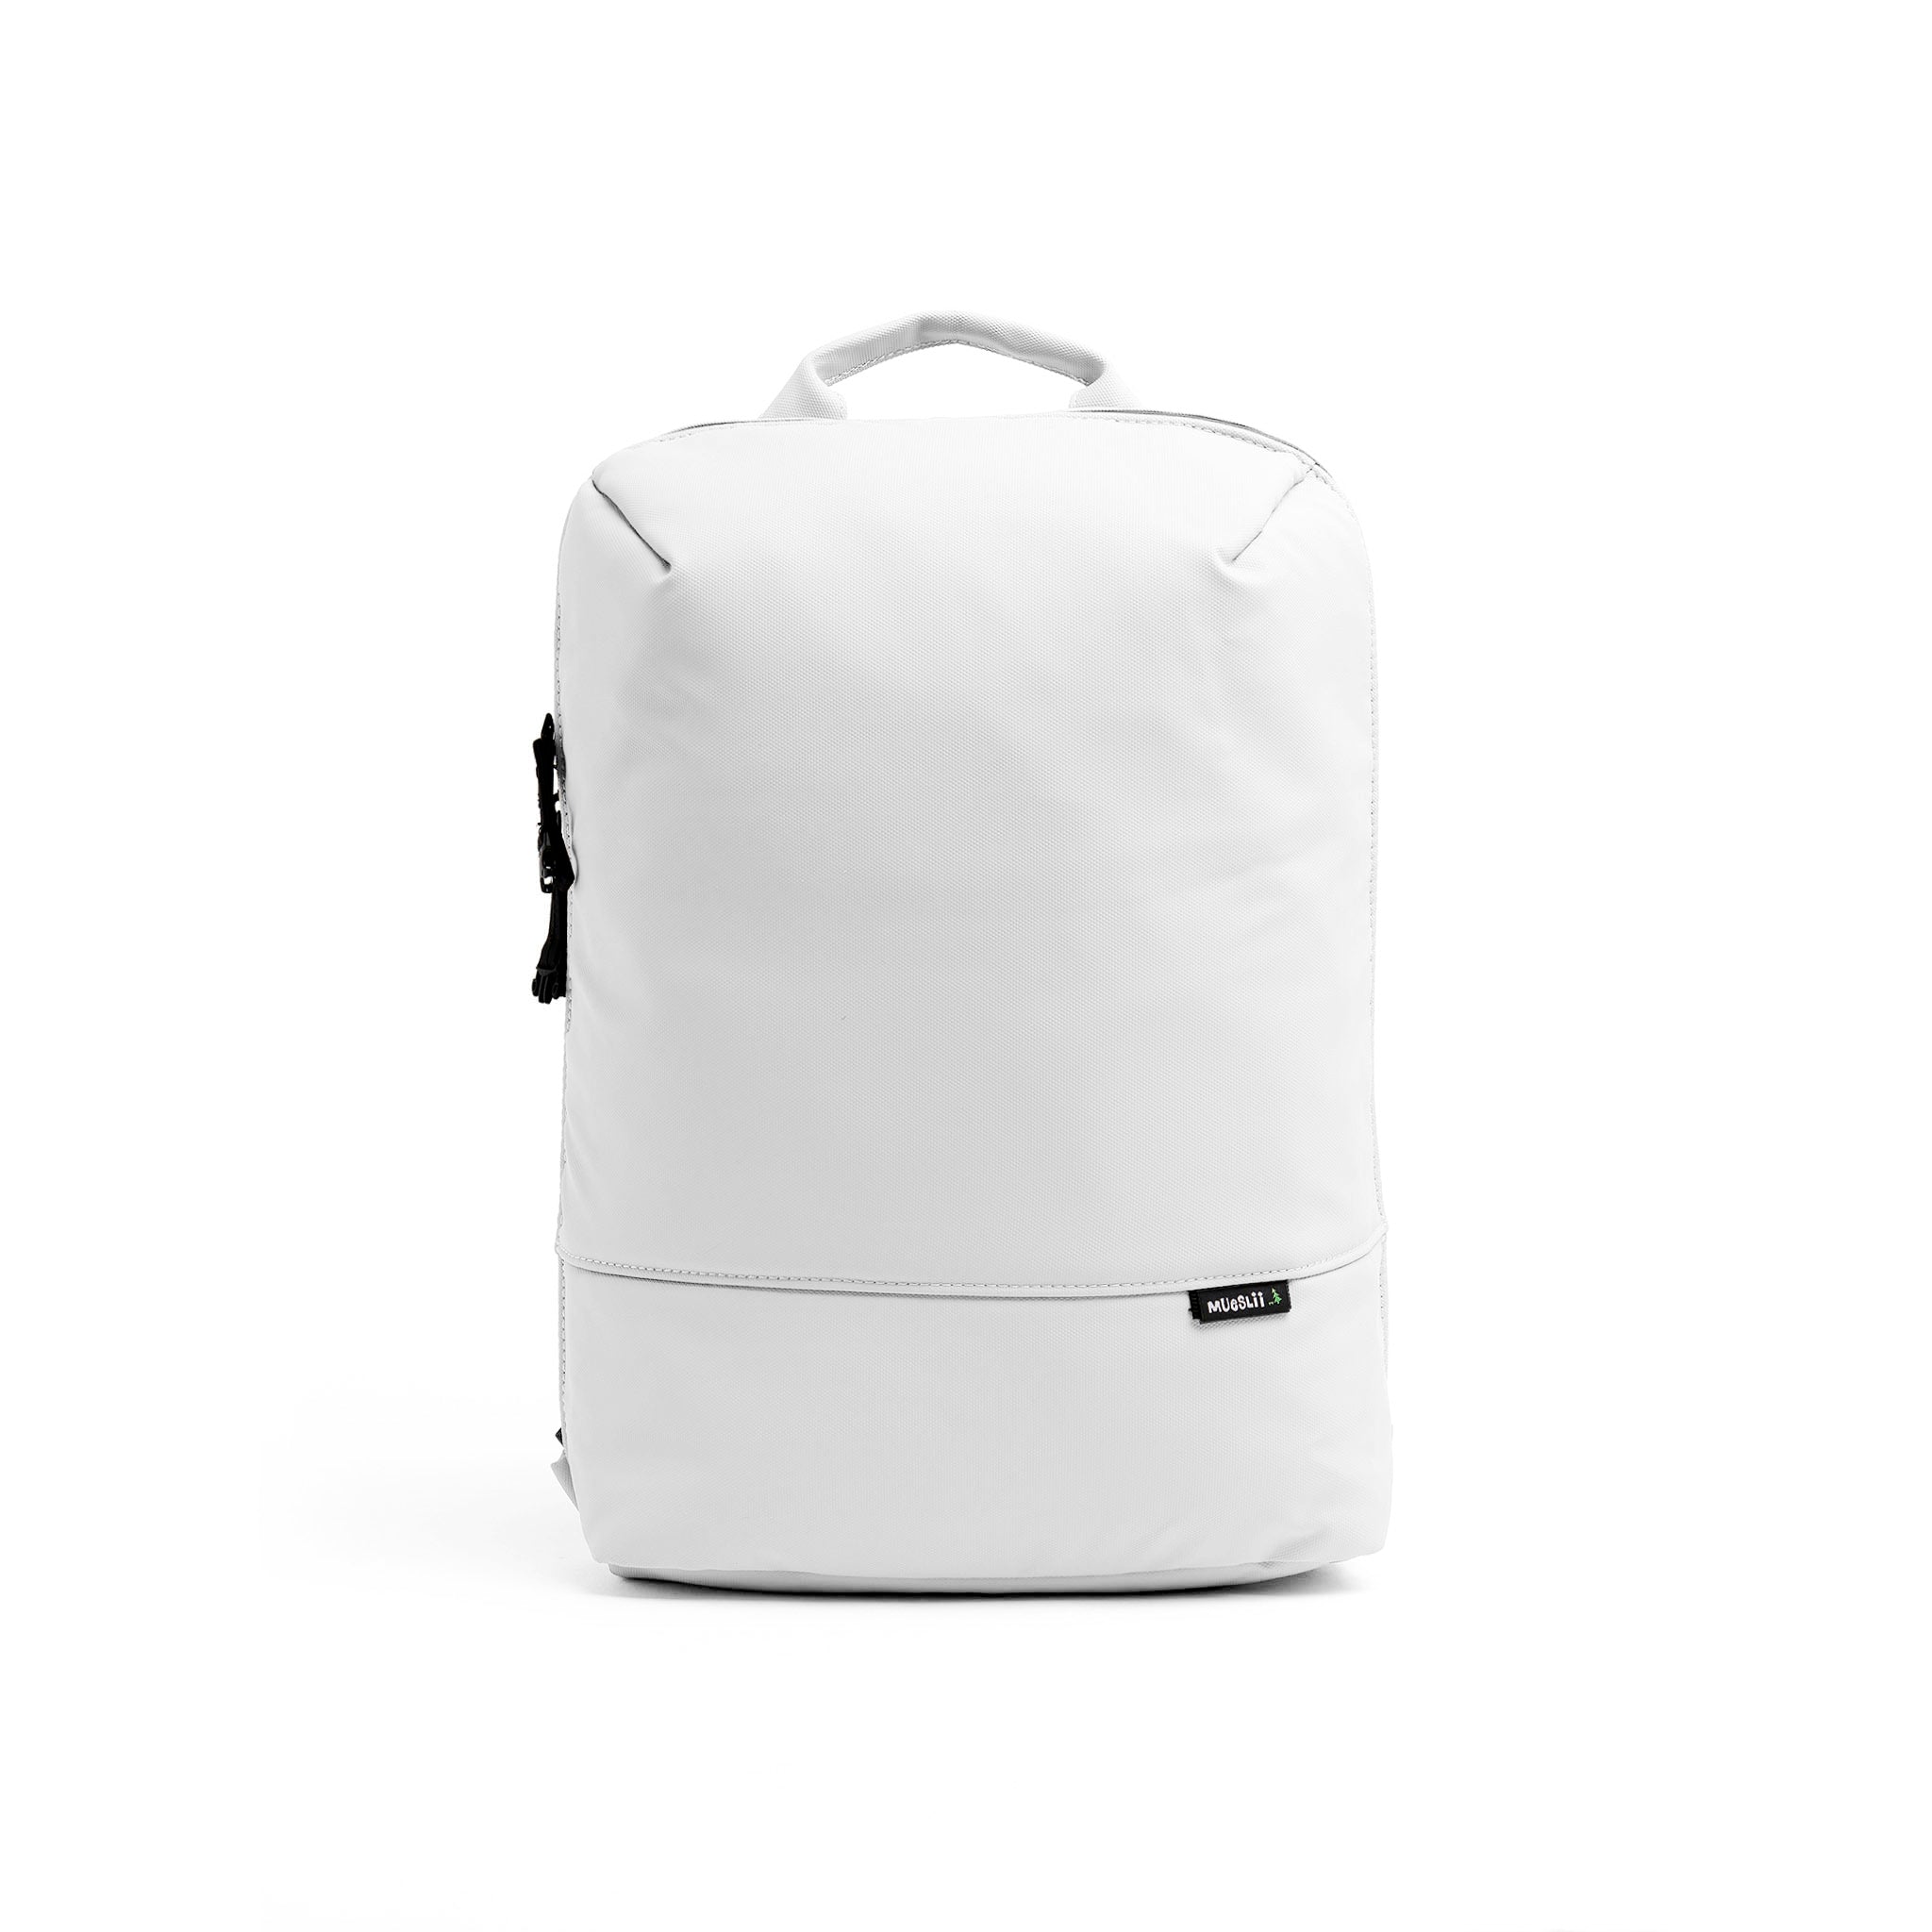 Mueslii daily backpack, made of PU coated waterproof nylon, with a laptop compartment, color black, front view.